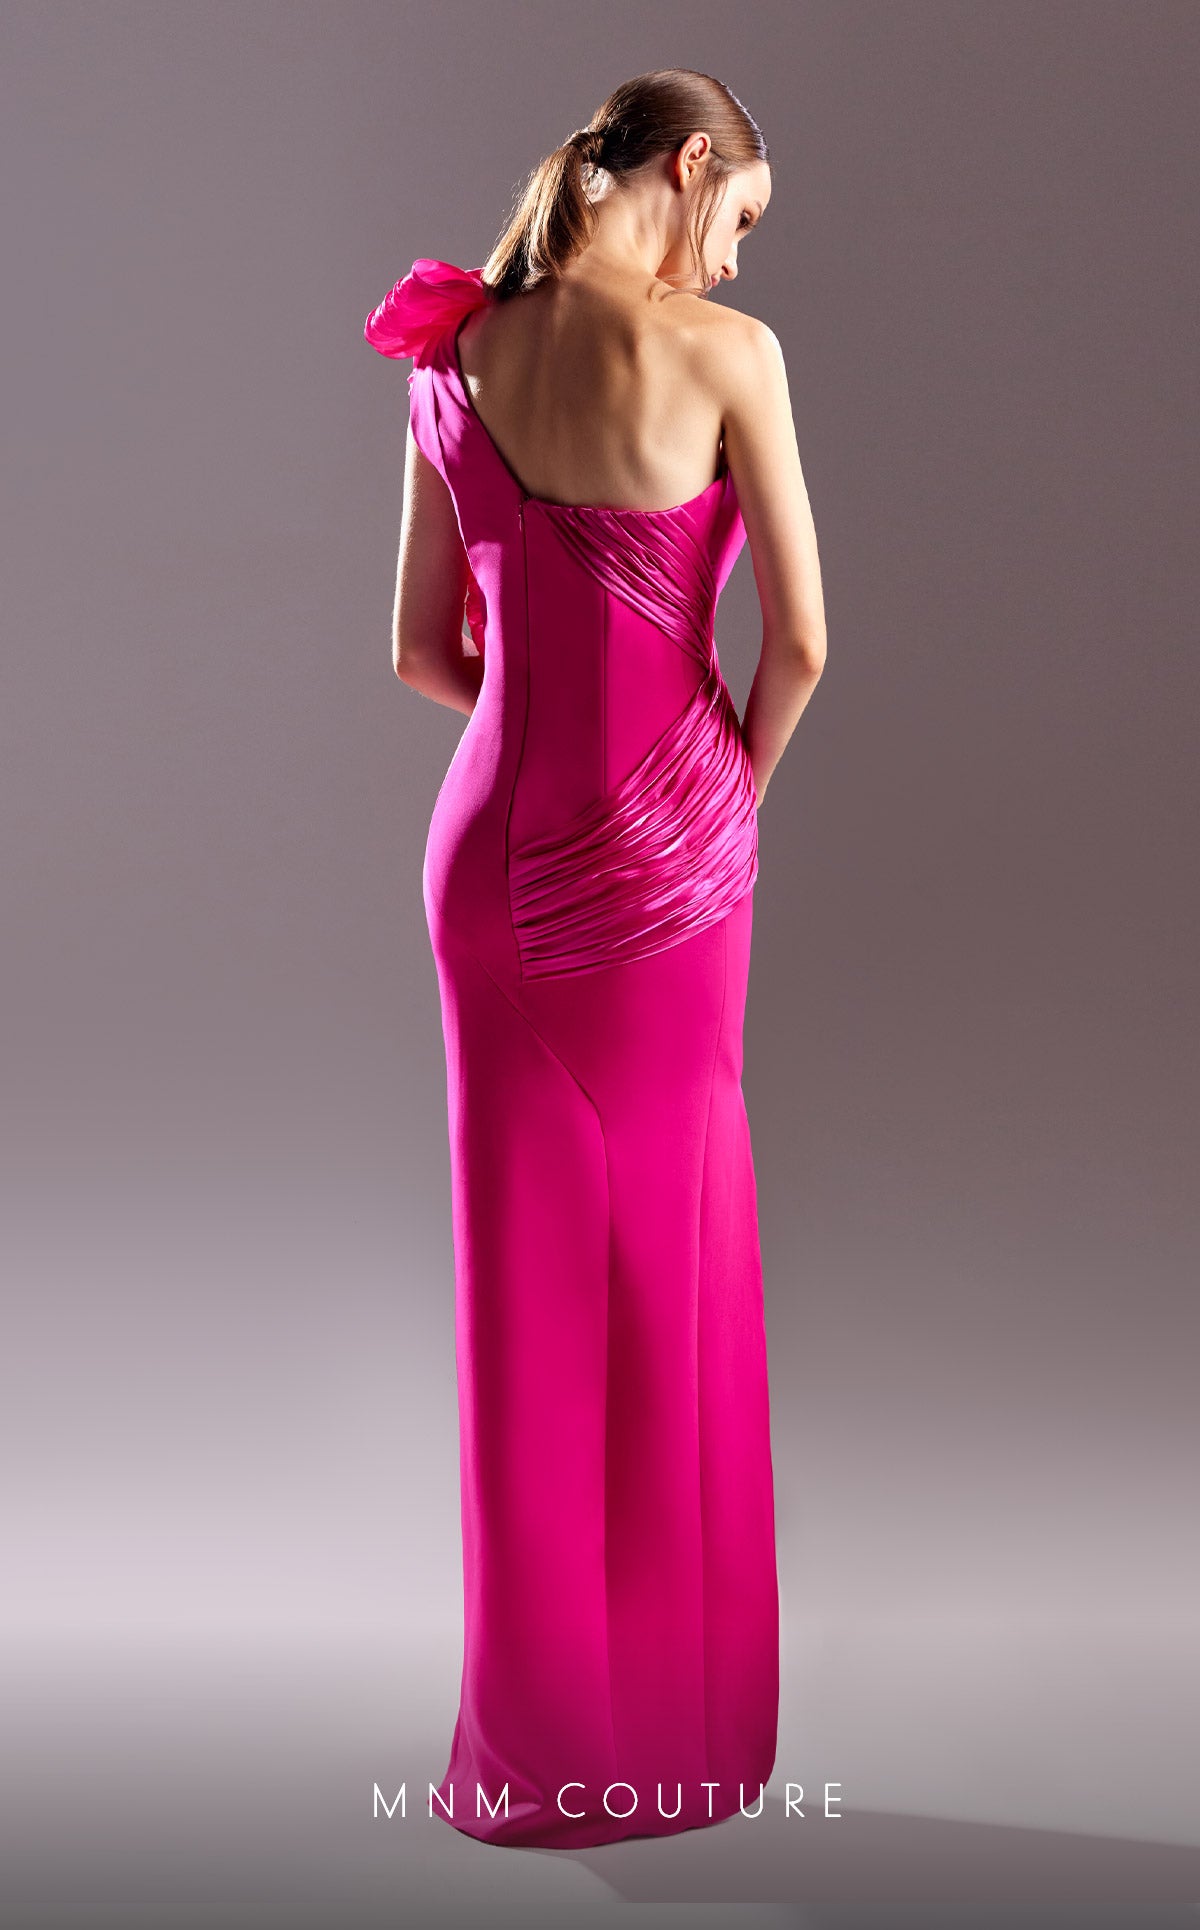 G1530 MNM Couture one shoulder pink evening gown with flattering fabric draping and  front slit